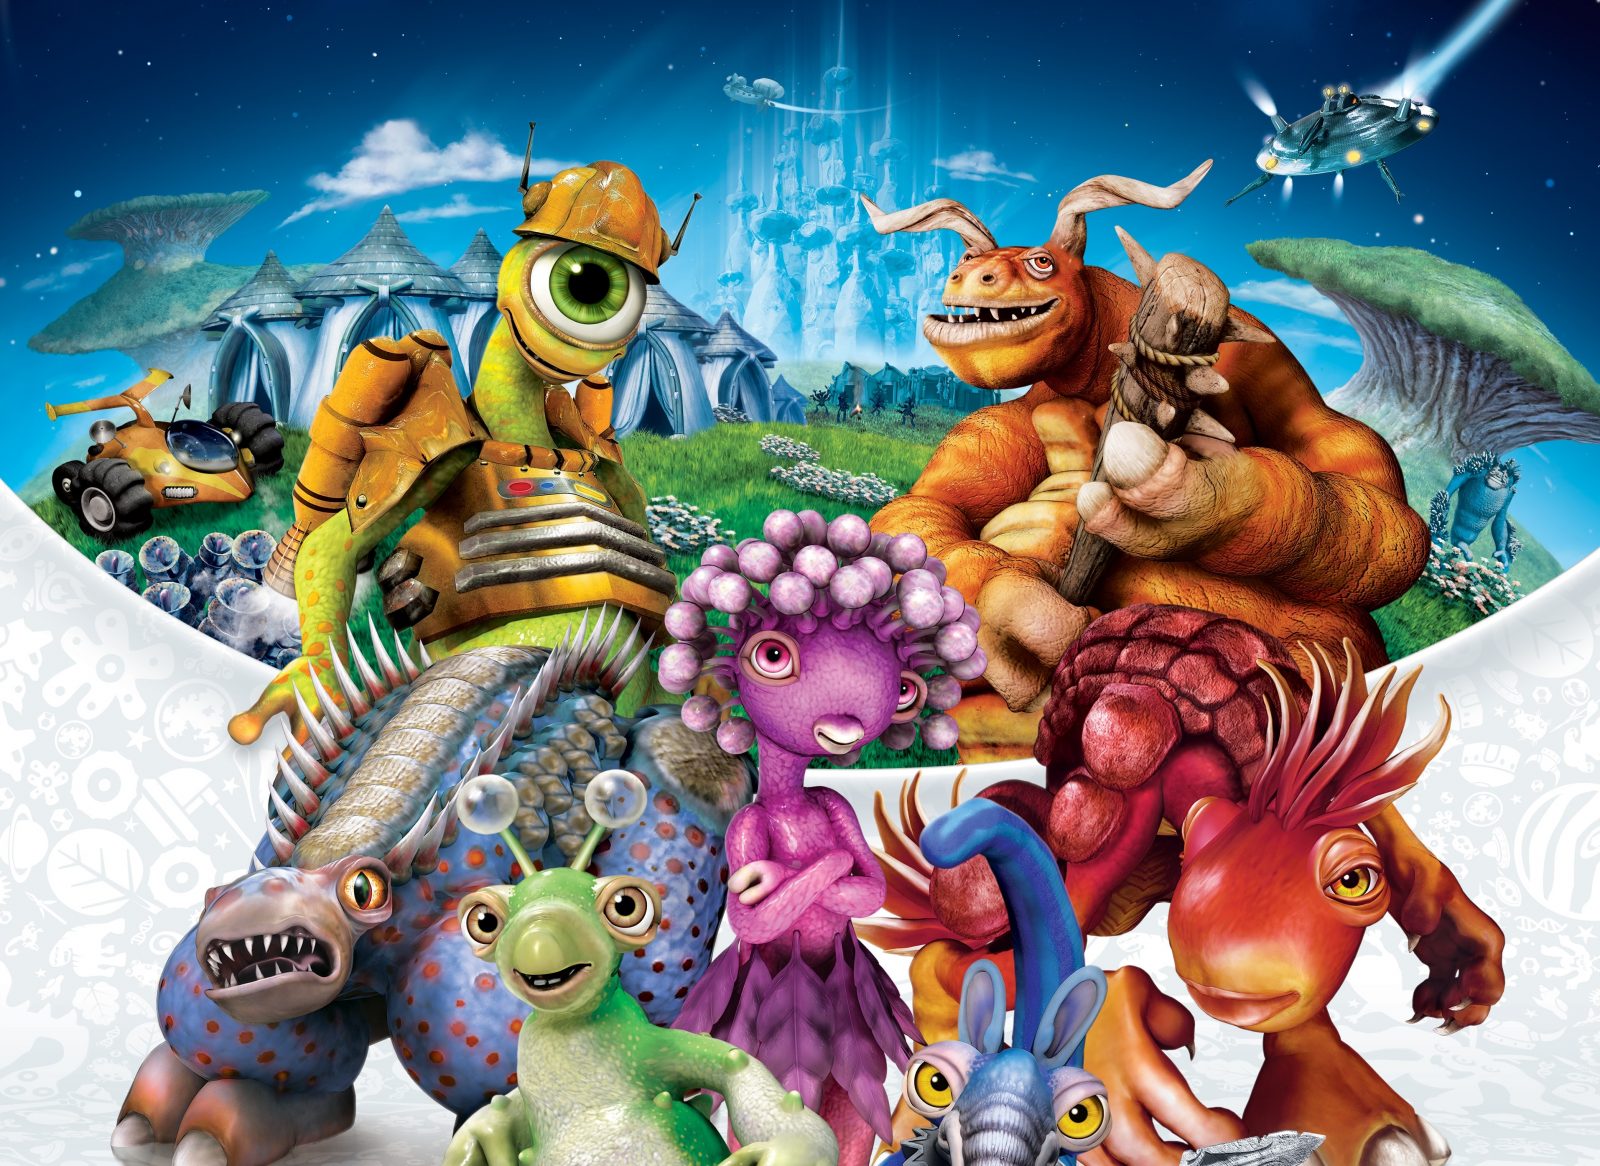 spore patch 1.06 download